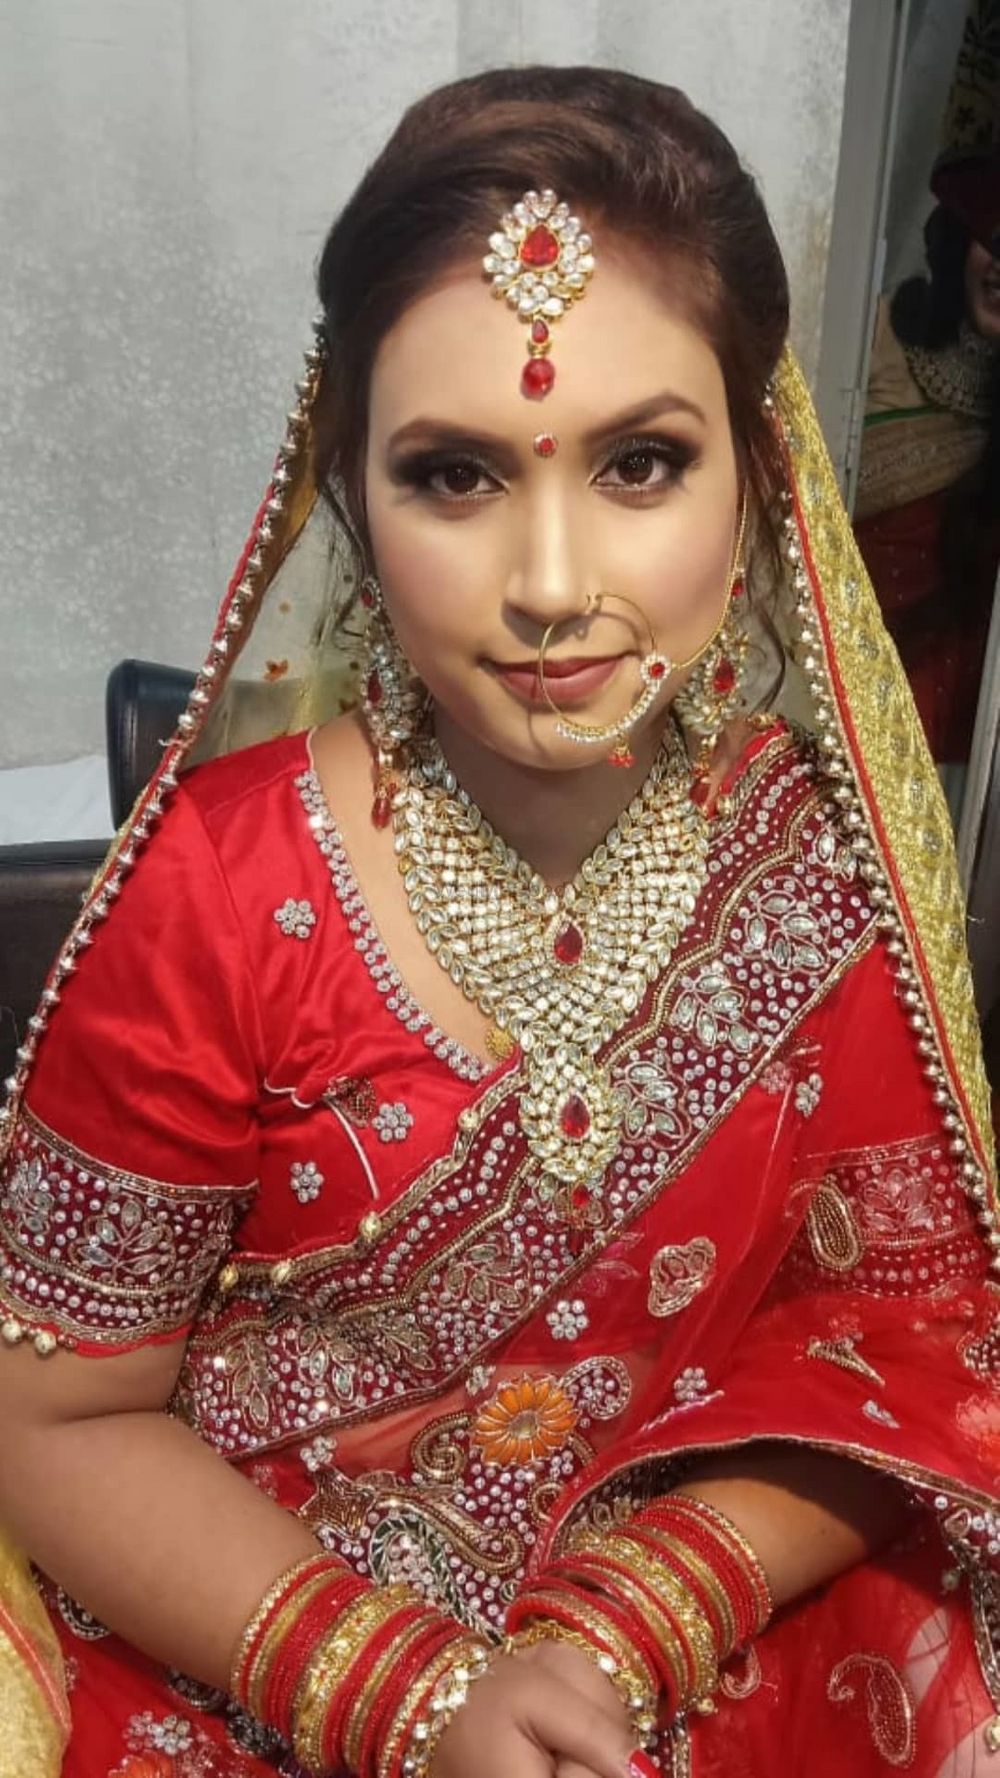 Photo From Brides - By Neha Makeover